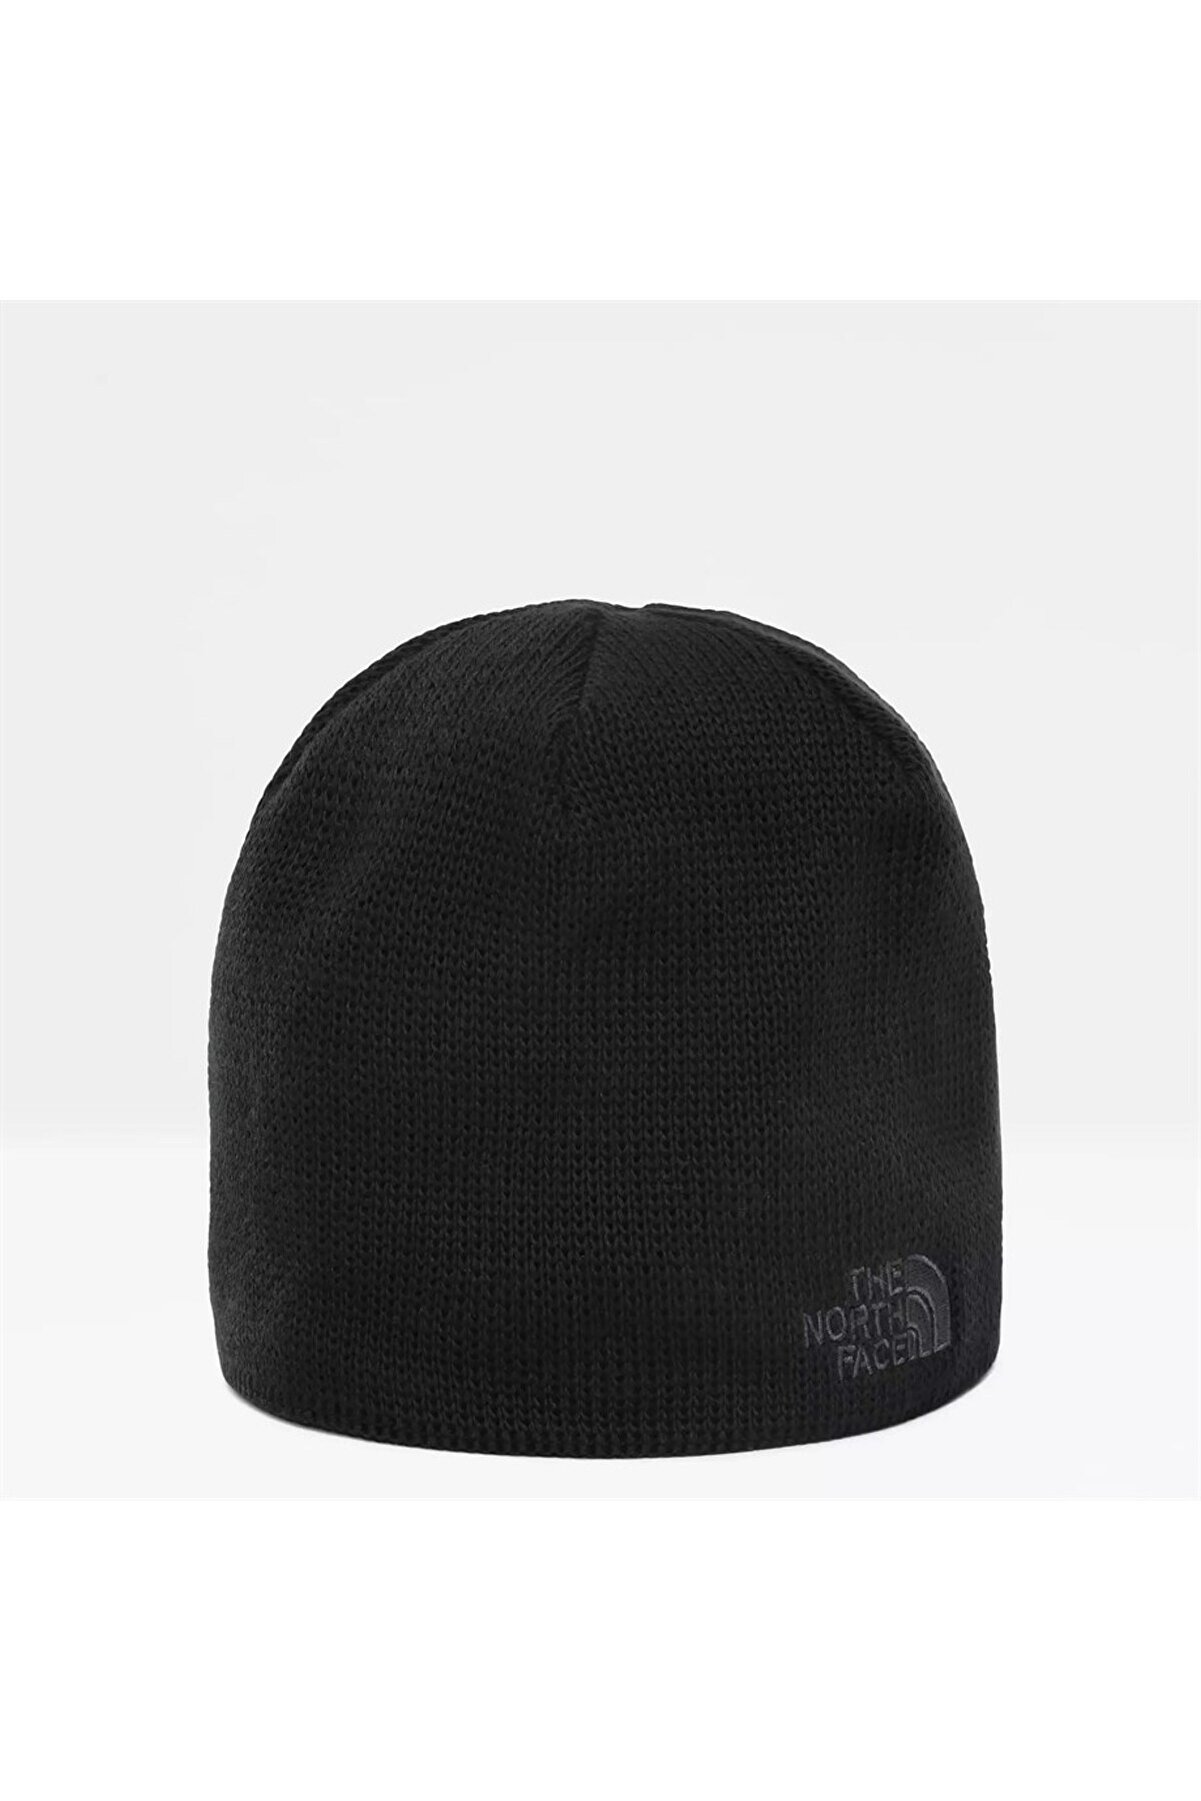 The North Face Bones Recycled Beanie Unisex Bere Nf0a3fnsjk31